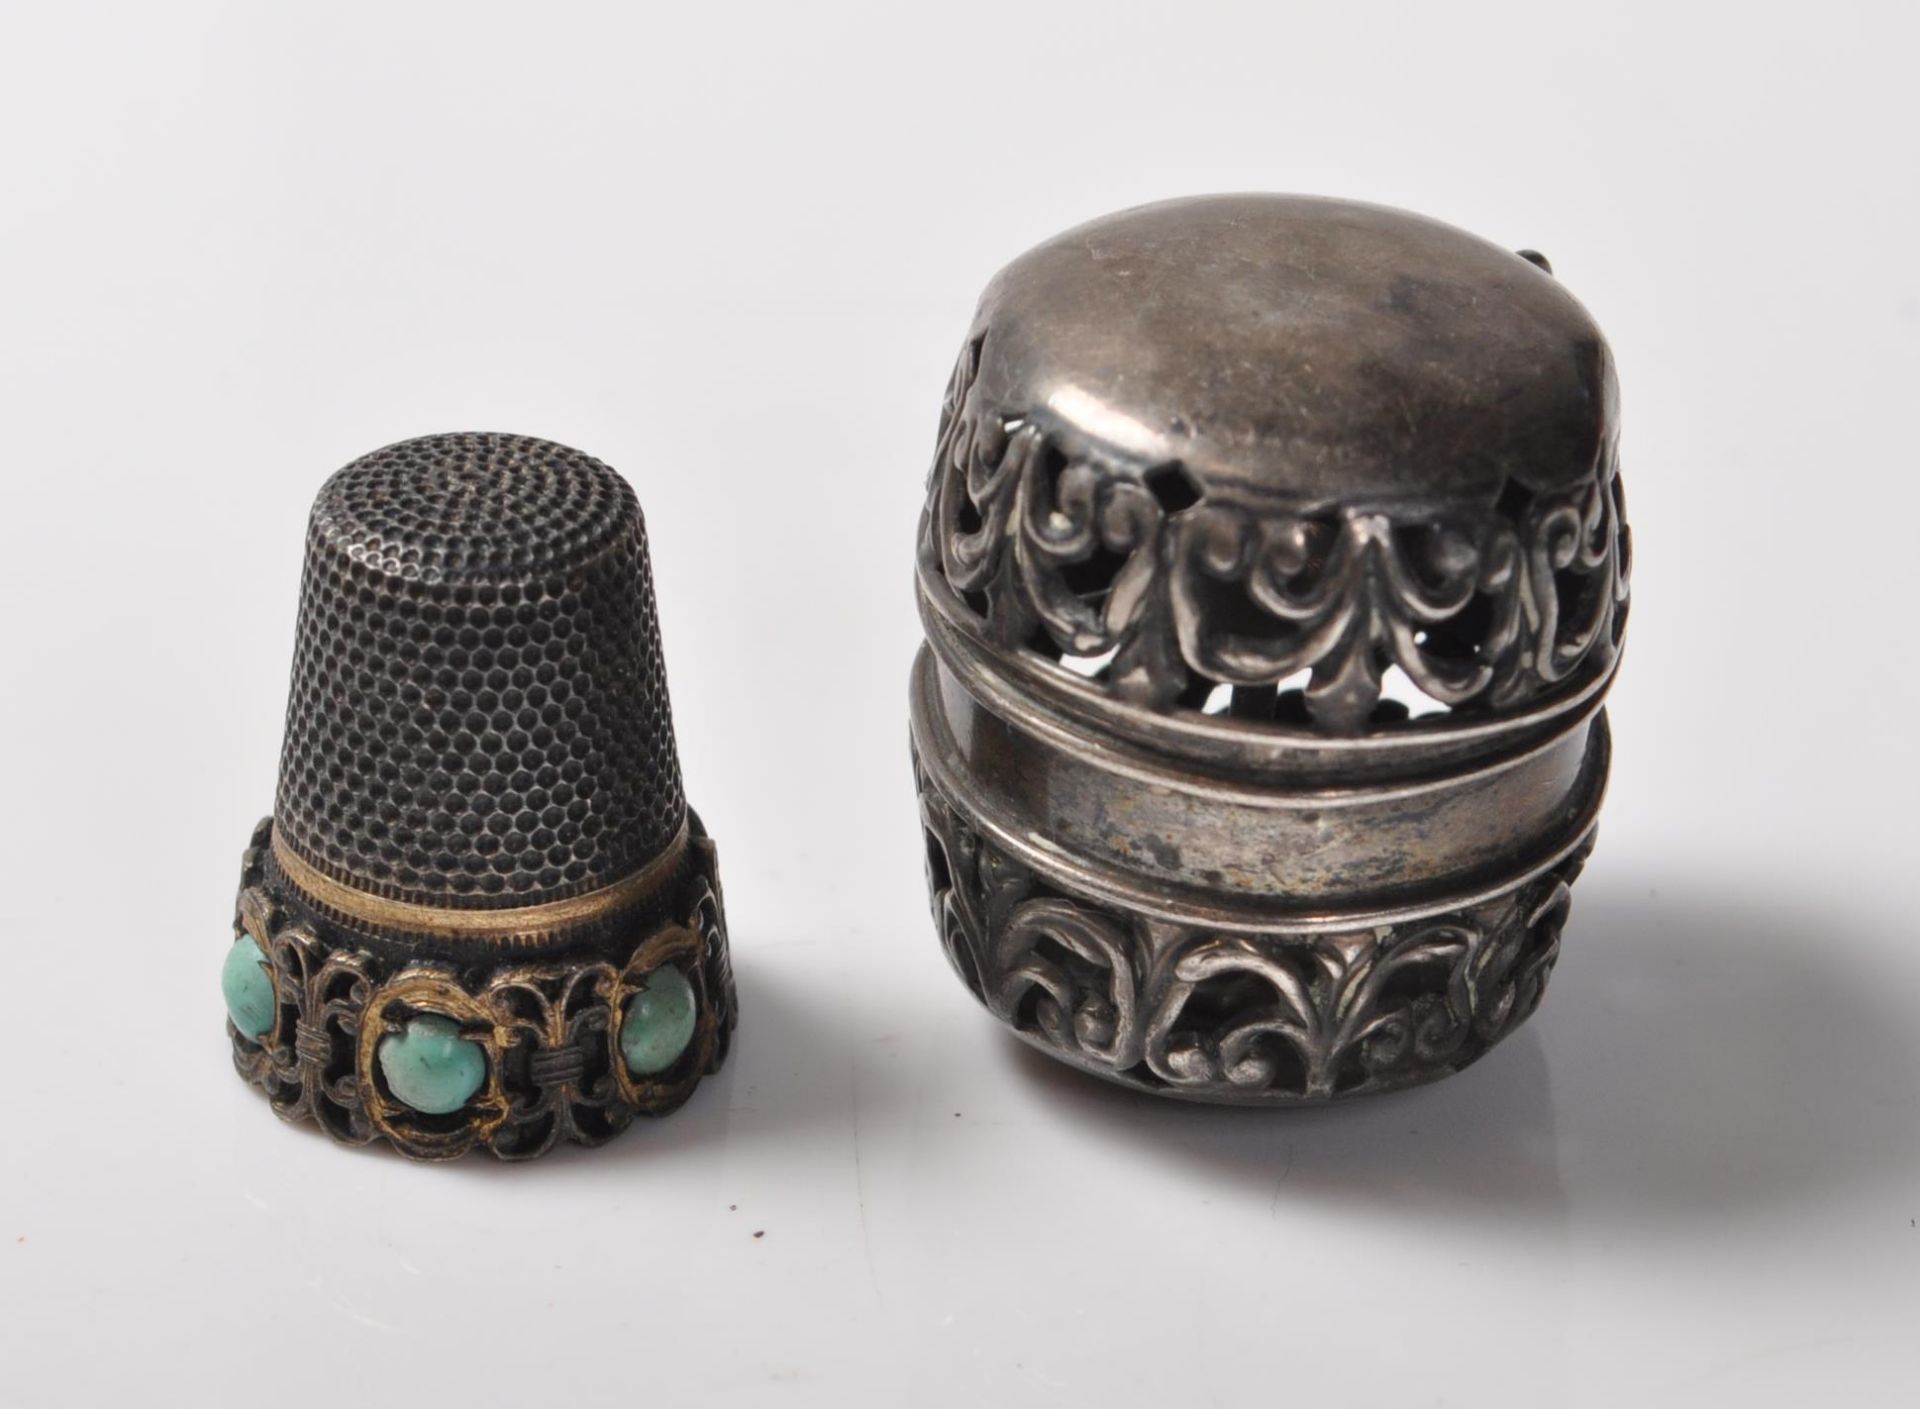 ANTIQUE SILVER AND TURQUOISE THIMBLE IN FITTED CASE